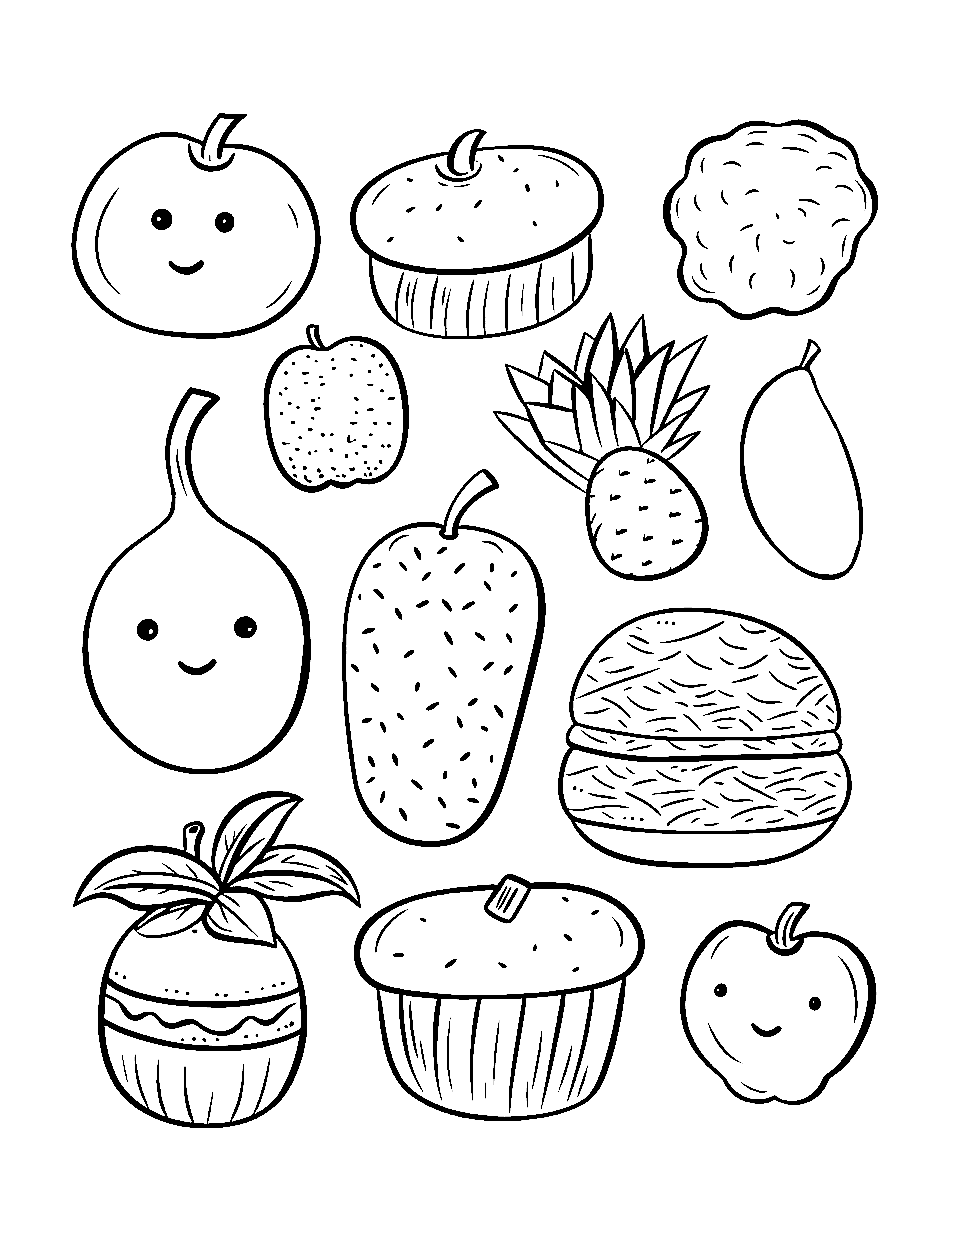 Food Clipart Collage Coloring Page - Simple clipart images of fruits, veggies.